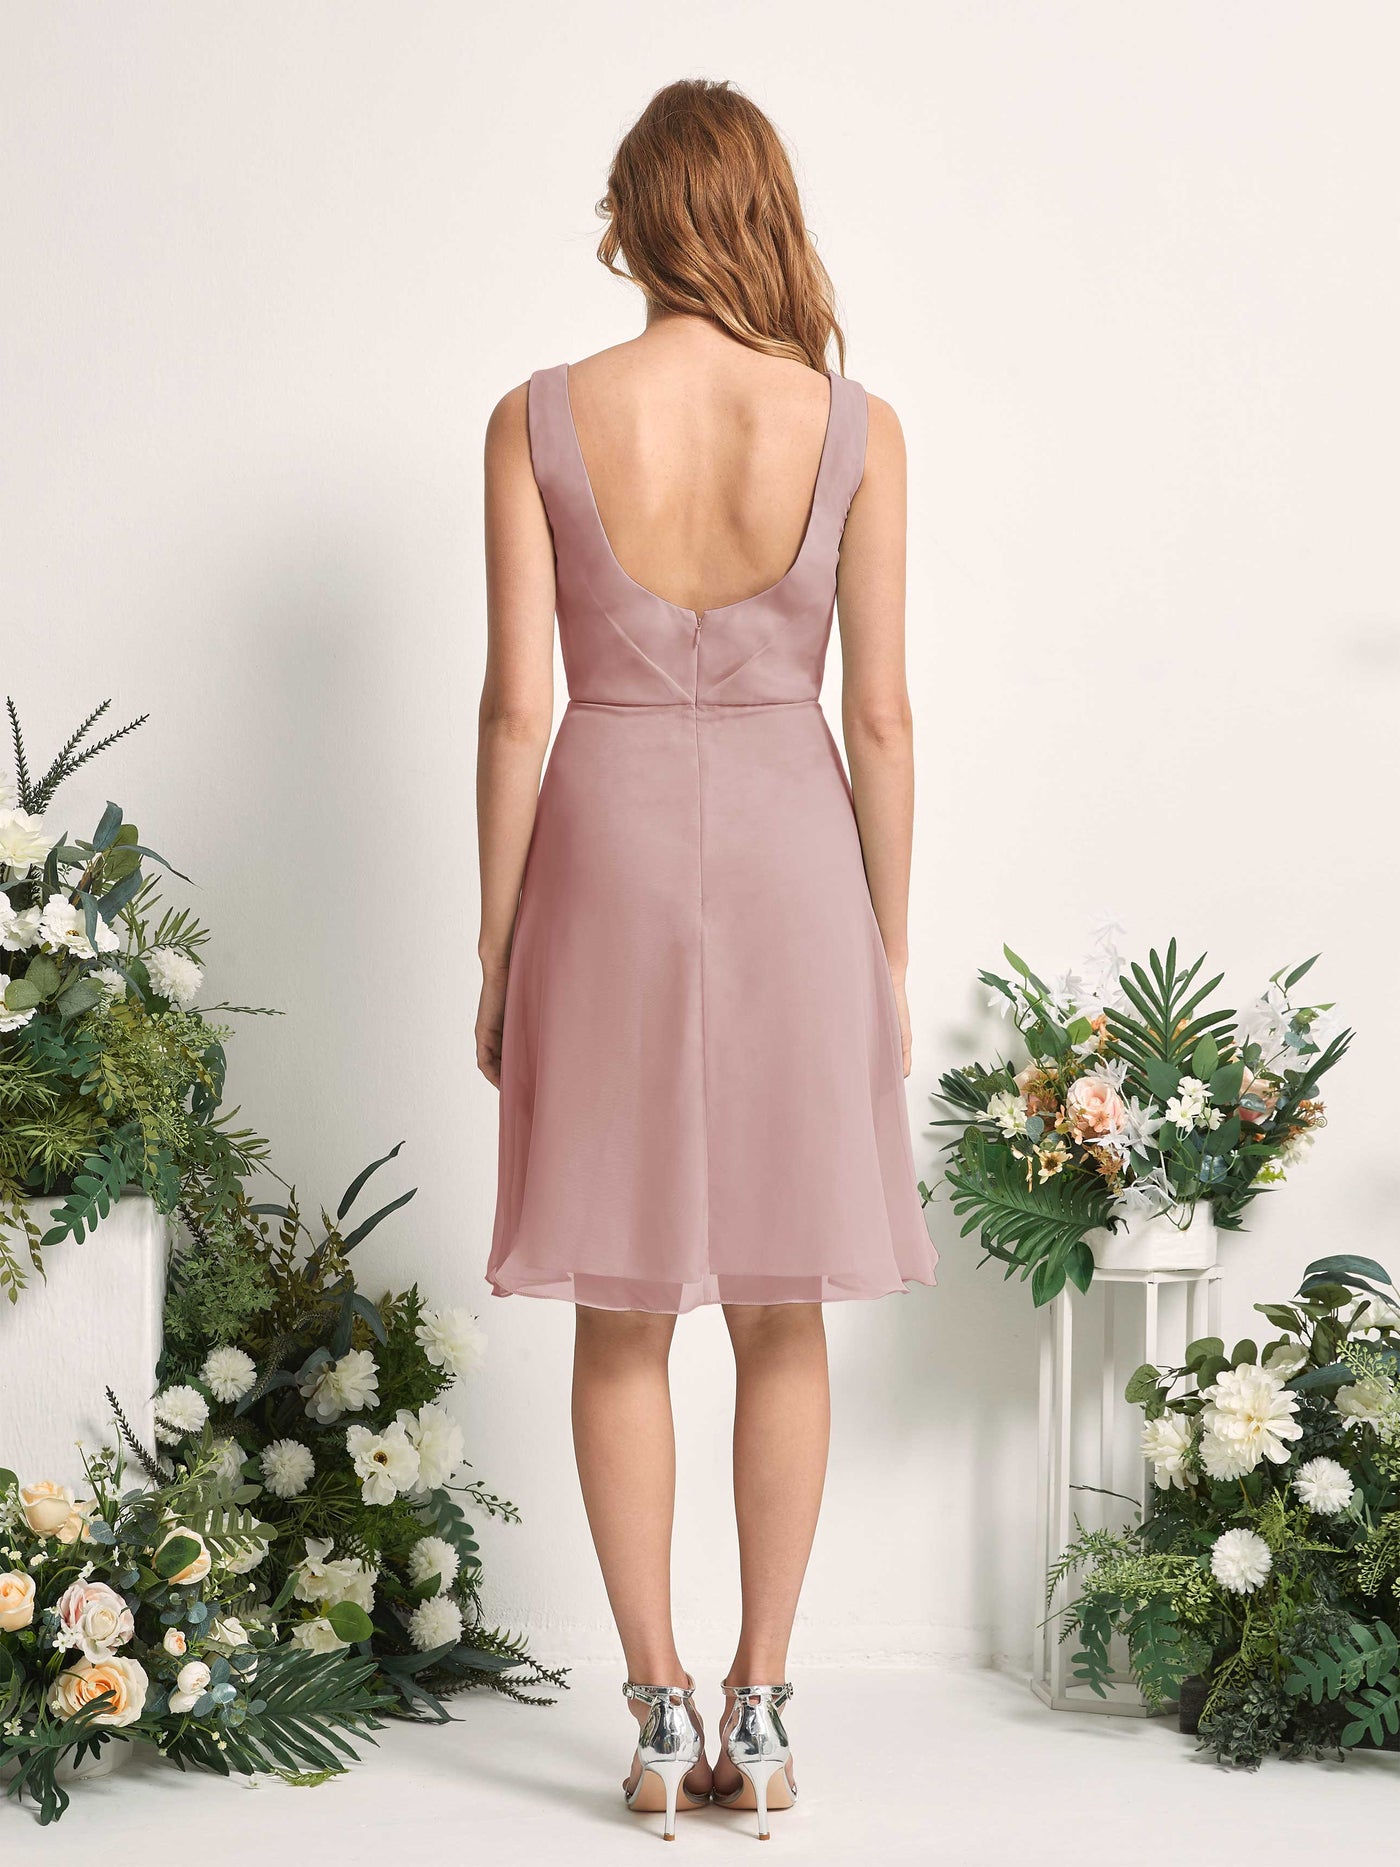 Bridesmaid Dress A-line Chiffon Straps Knee Length Sleeveless Wedding Party Dress - Dusty Rose (81226609)#color_dusty-rose